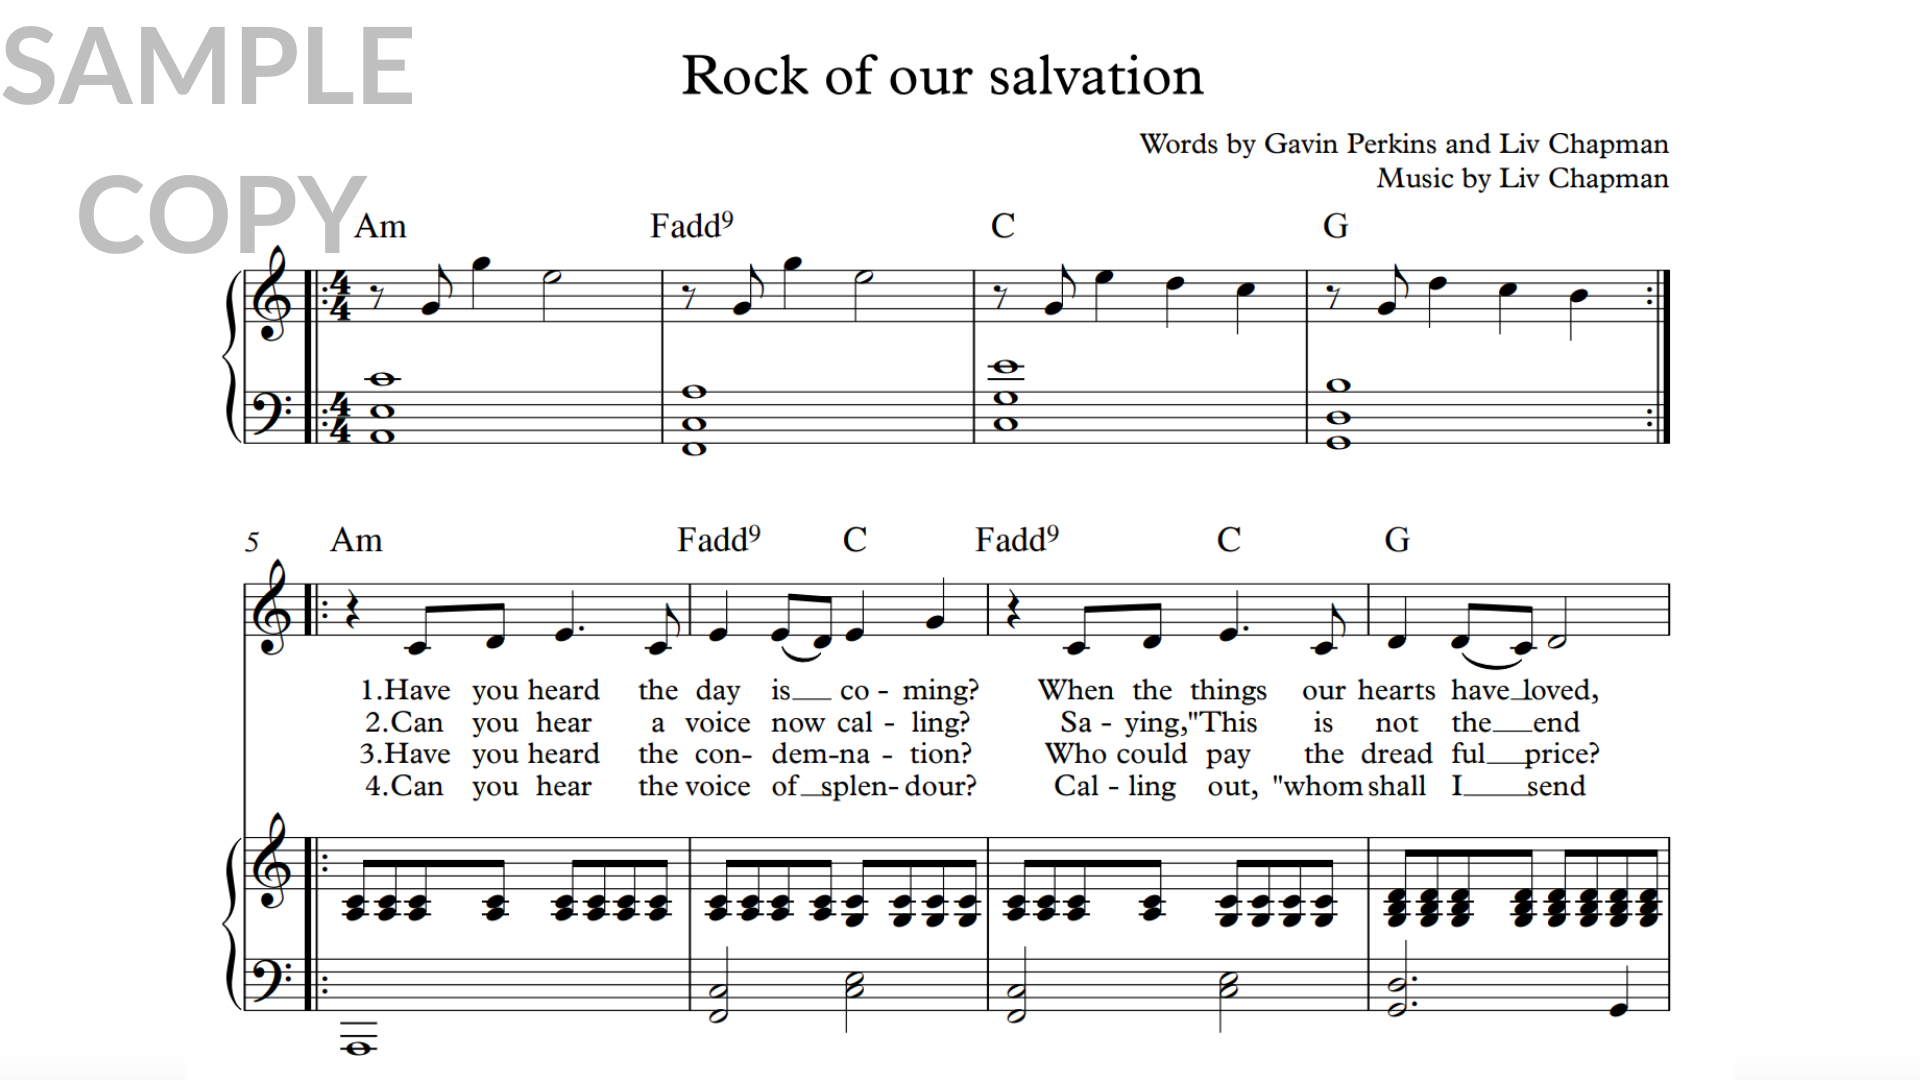 Rock of Our Salvation